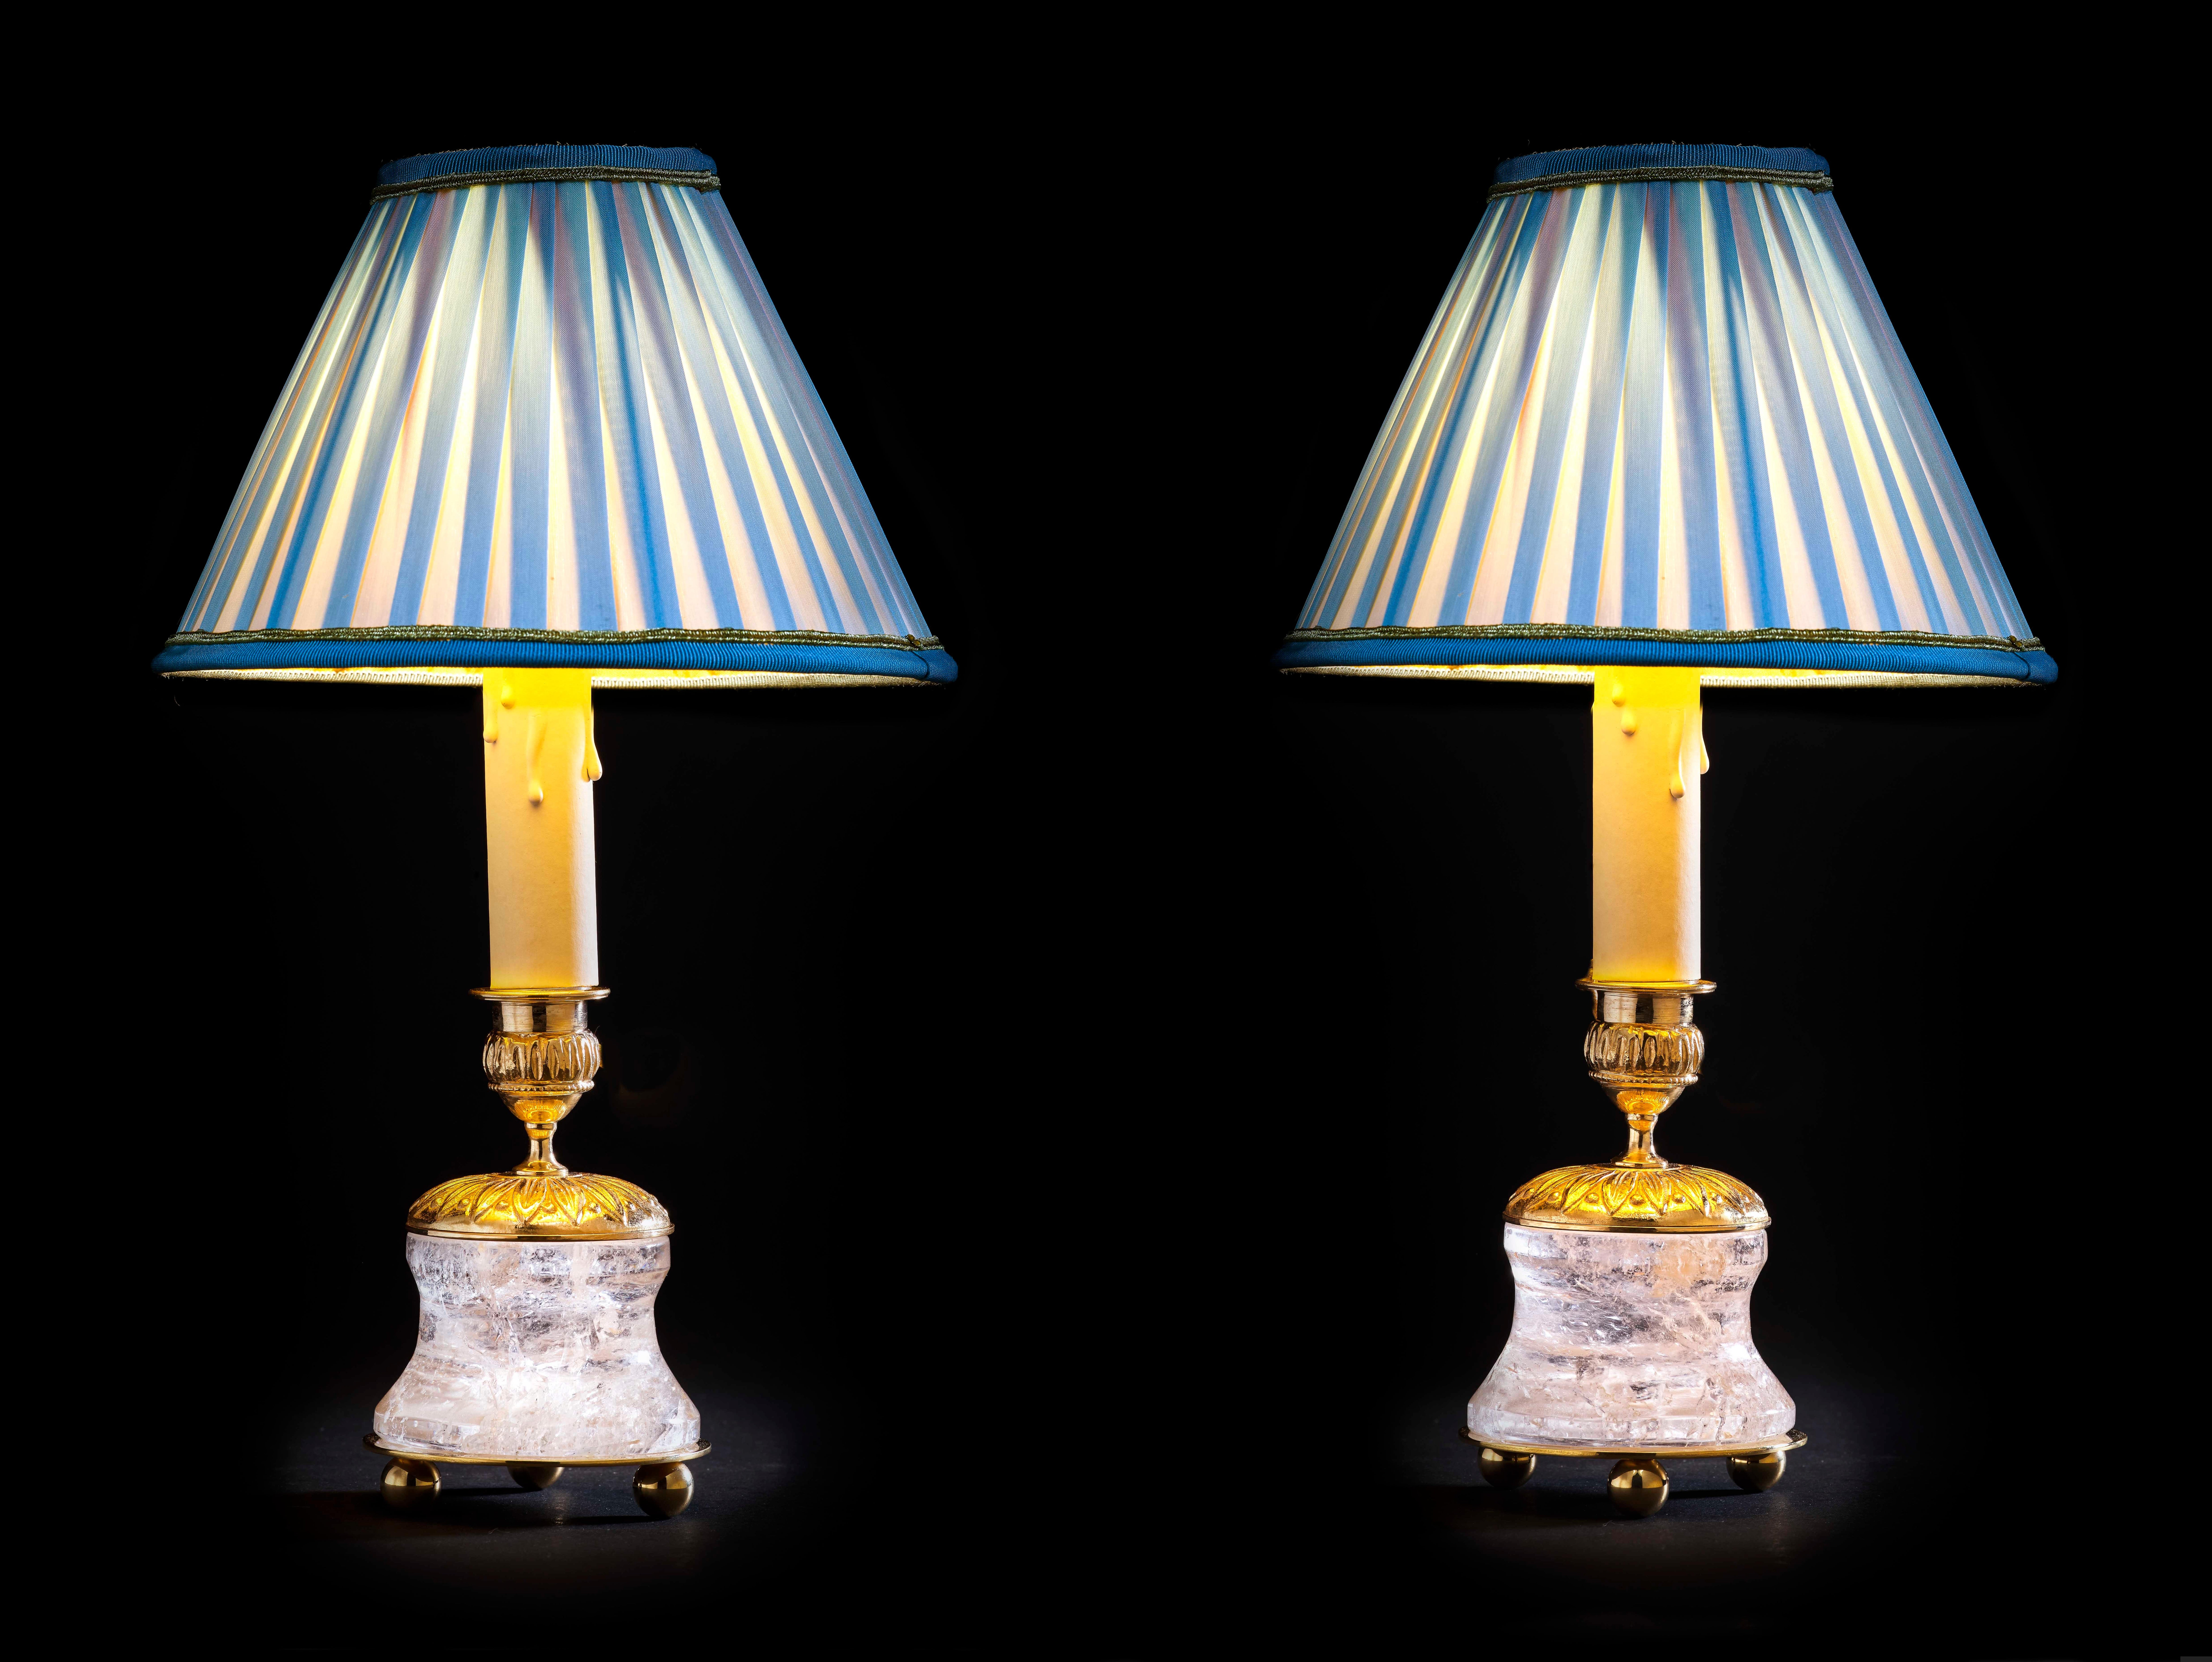 Rock crystal French First Empire style 24-karat Ormolu gilding bronze Light blue lampshades made by Alexandre Vossion.
This model can be also used as candlesticks to make your dining table so chic.
Others colors for the lampshades are also